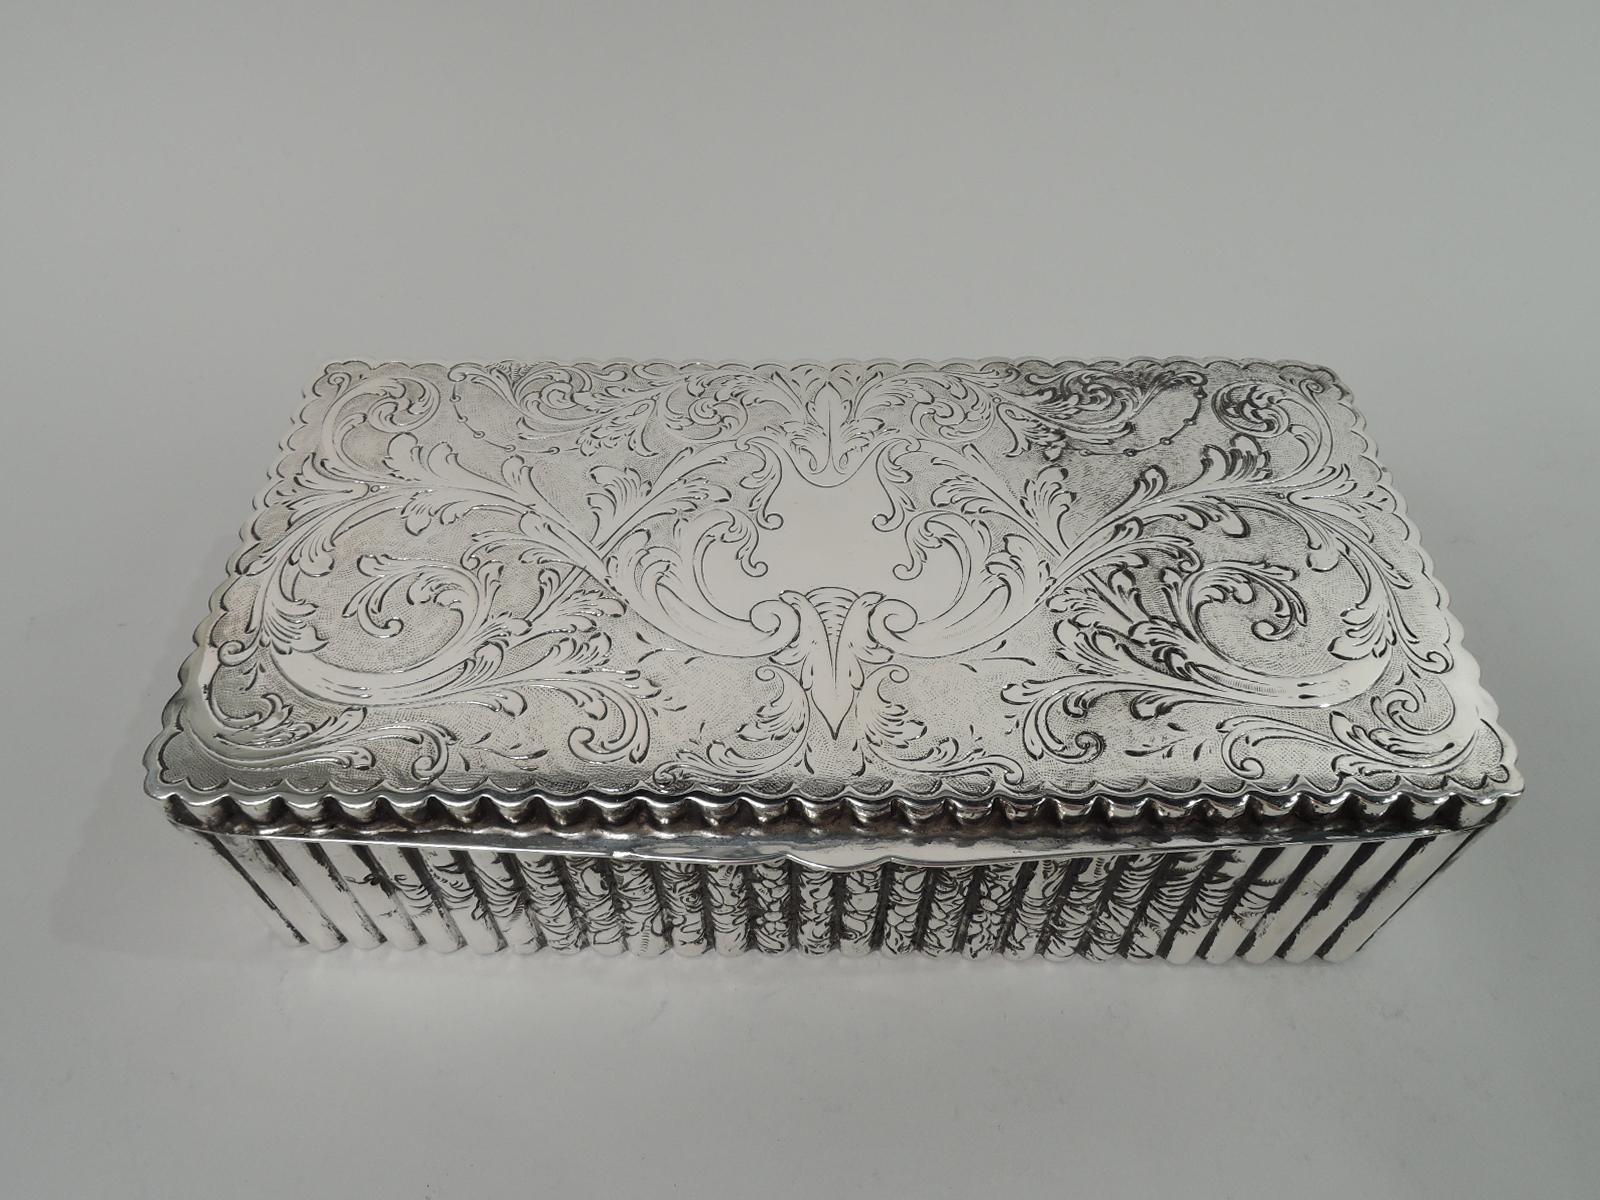 Pretty European Classical 800 silver keepsake box, ca 1940. Rectangular. Cover flat and hinged with tapering tab. Sides fluted and engraved with flowering and leafing branches. Cover top has heraldic cartouche (vacant) surrounded by leafing